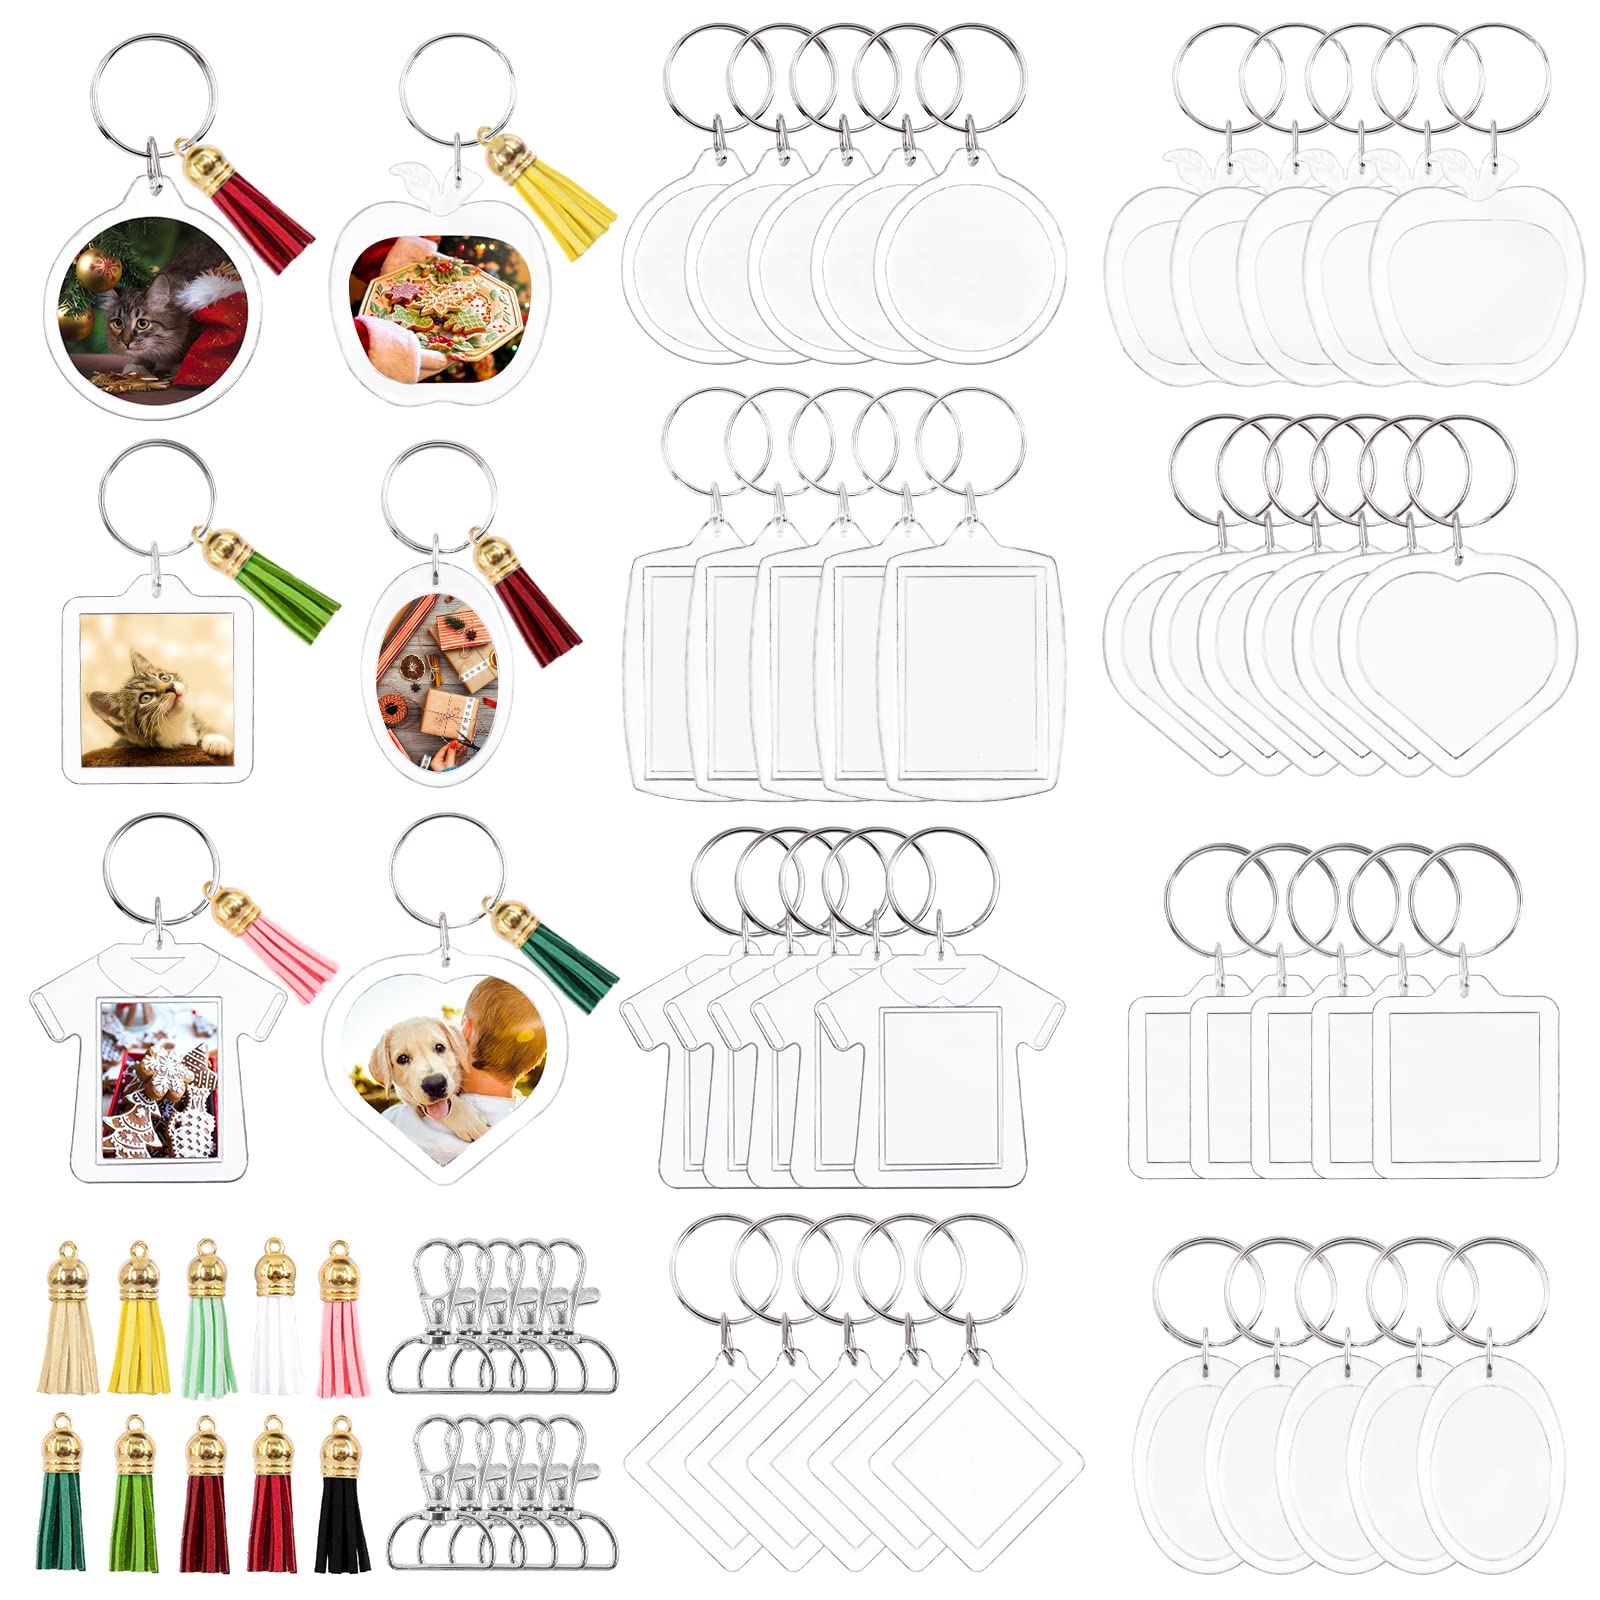 Mardatt 84 Pcs 8 Type Photo Frame Keychain Set, Clear Picture Insert Blank Keyrings with Split Ring and Tassels for Custom DIY Key Chain Projects and Crafts von Mardatt